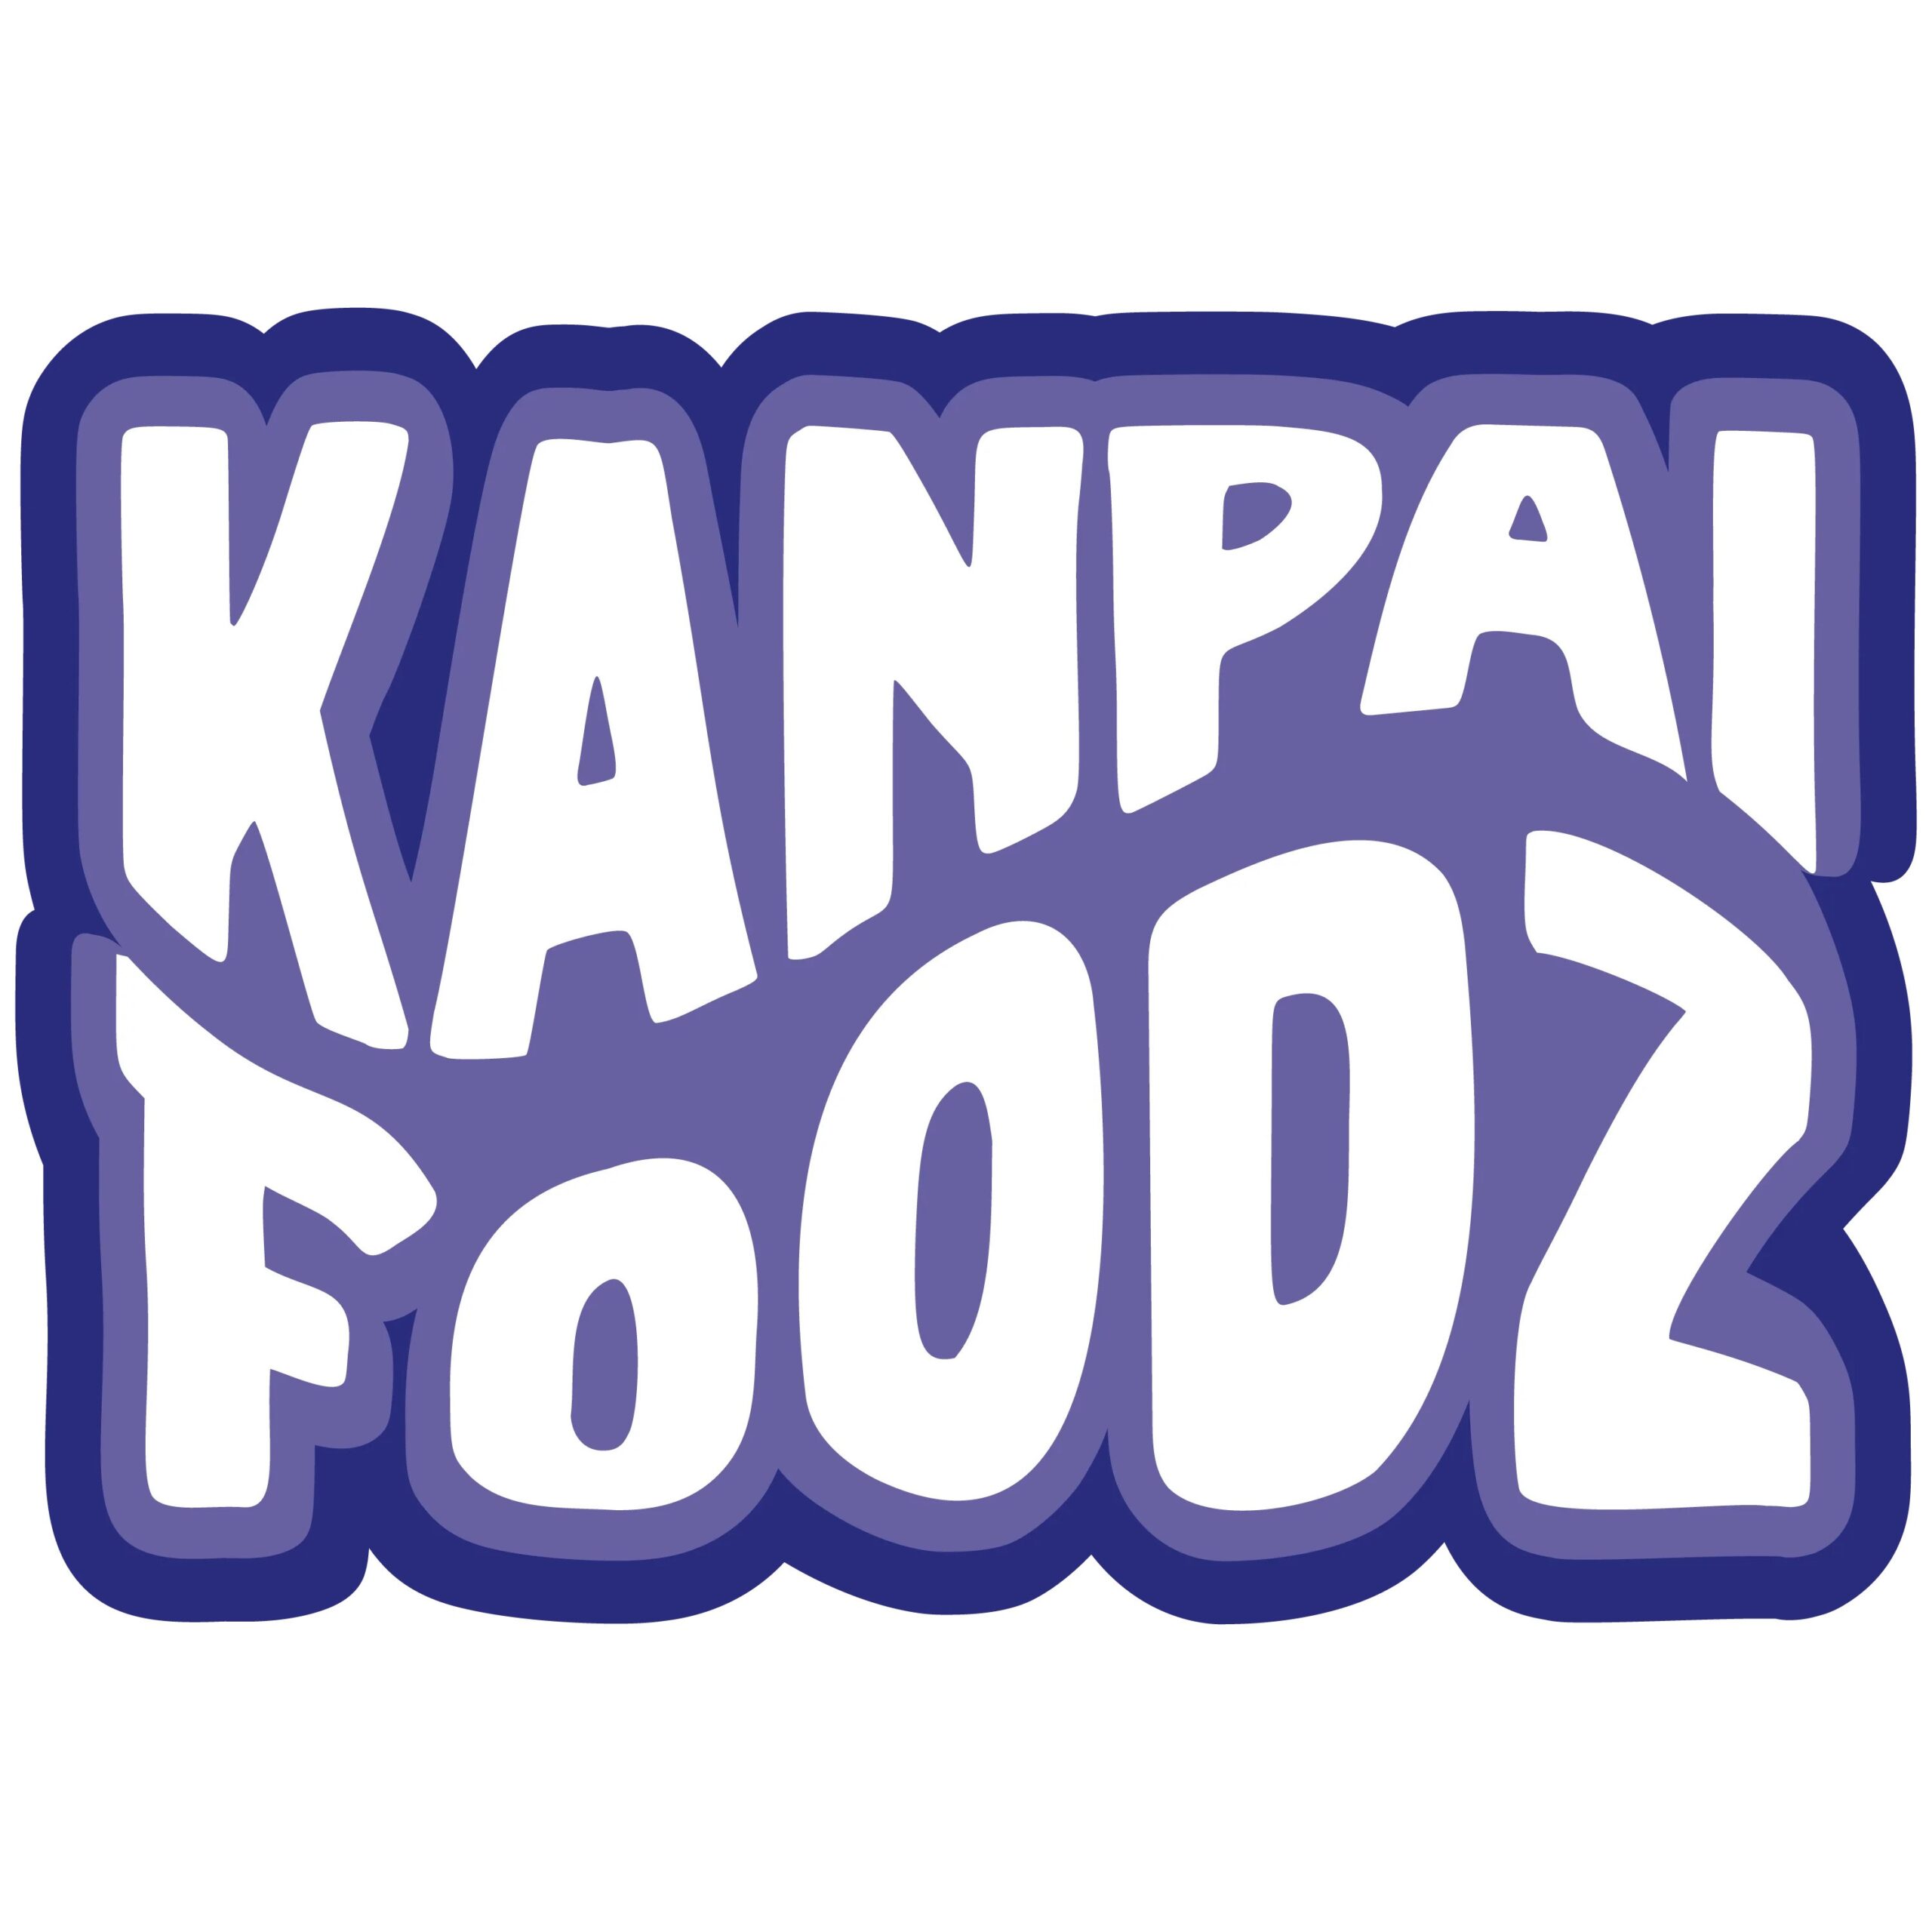 Remote Entry-level Content Writer Needed at Kanpai Foodz